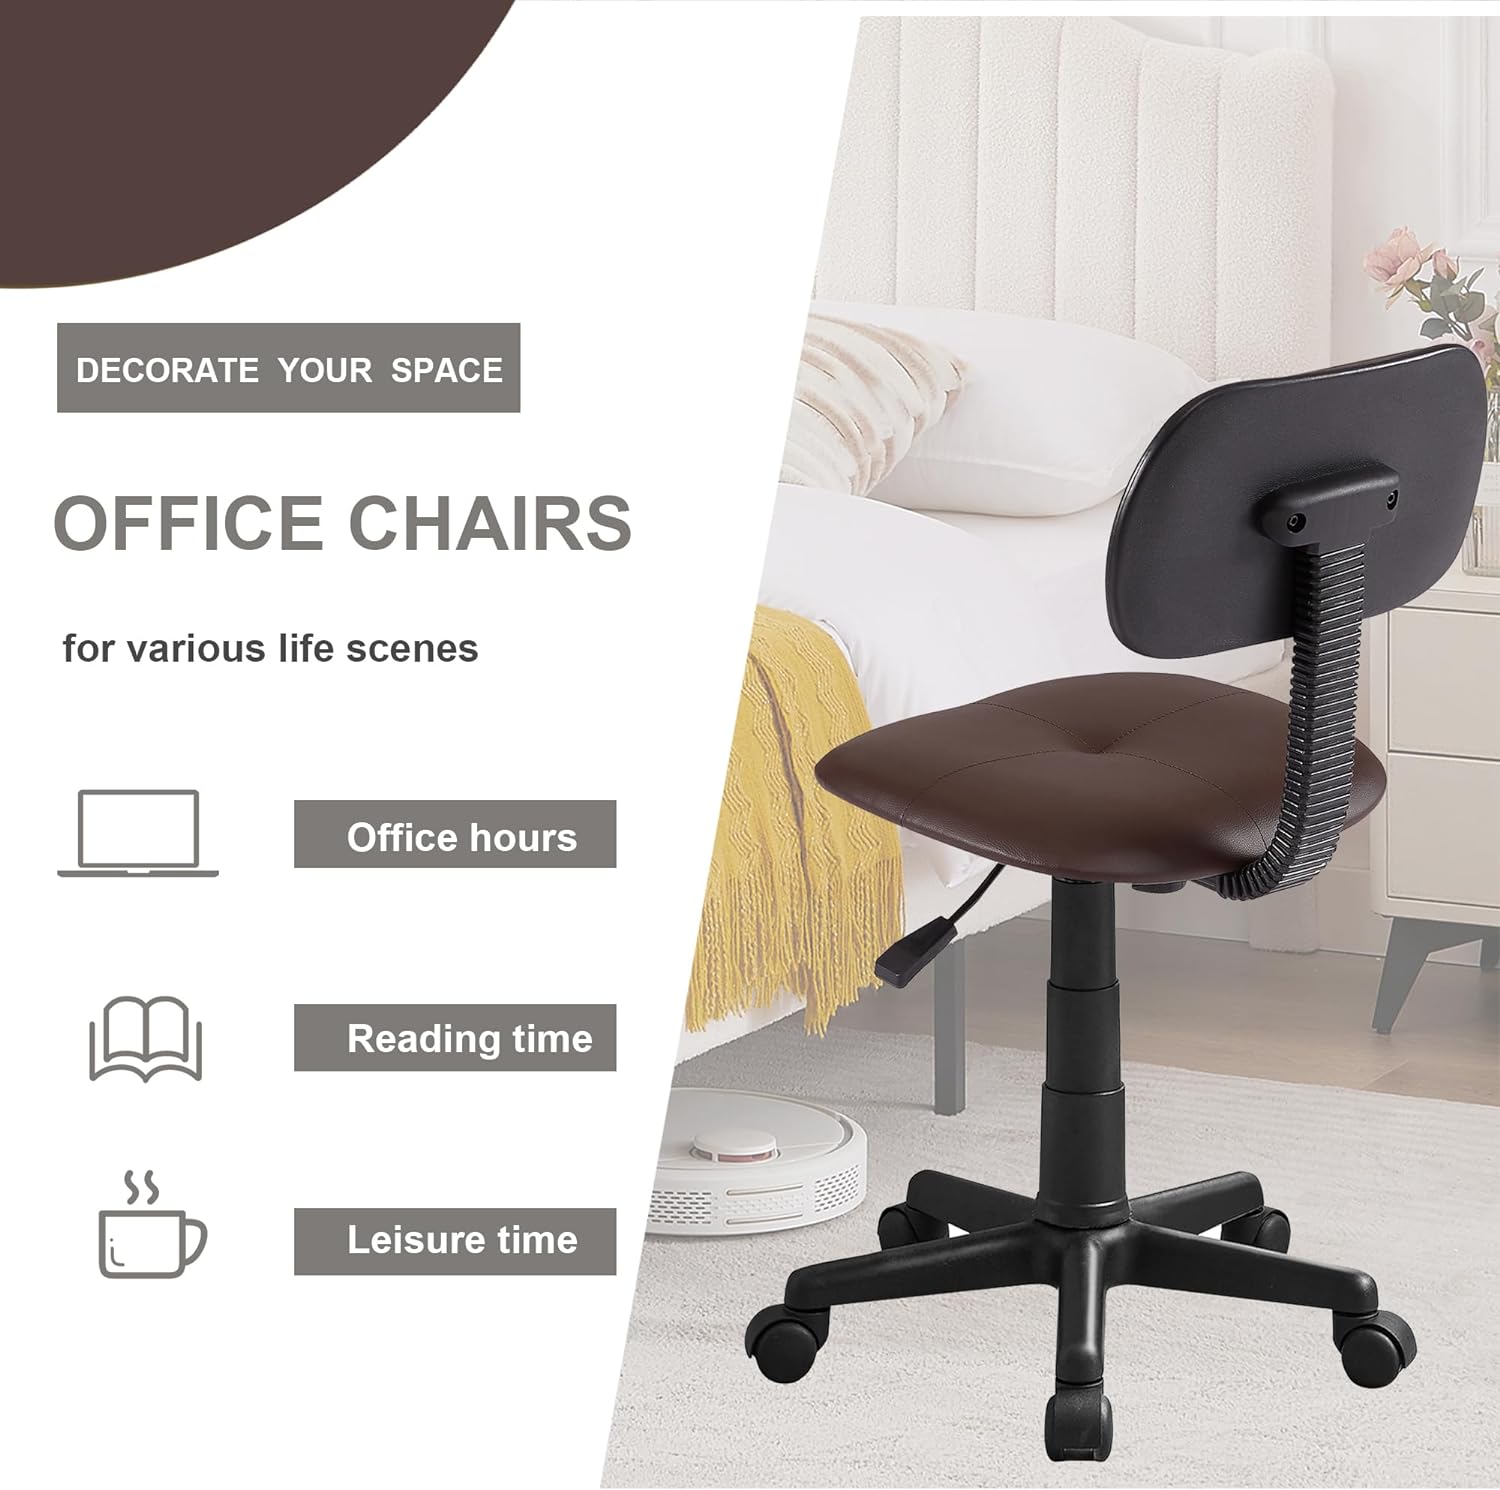 VECELO Armless Home Office Chair Low-Back Height Adjustable Stools